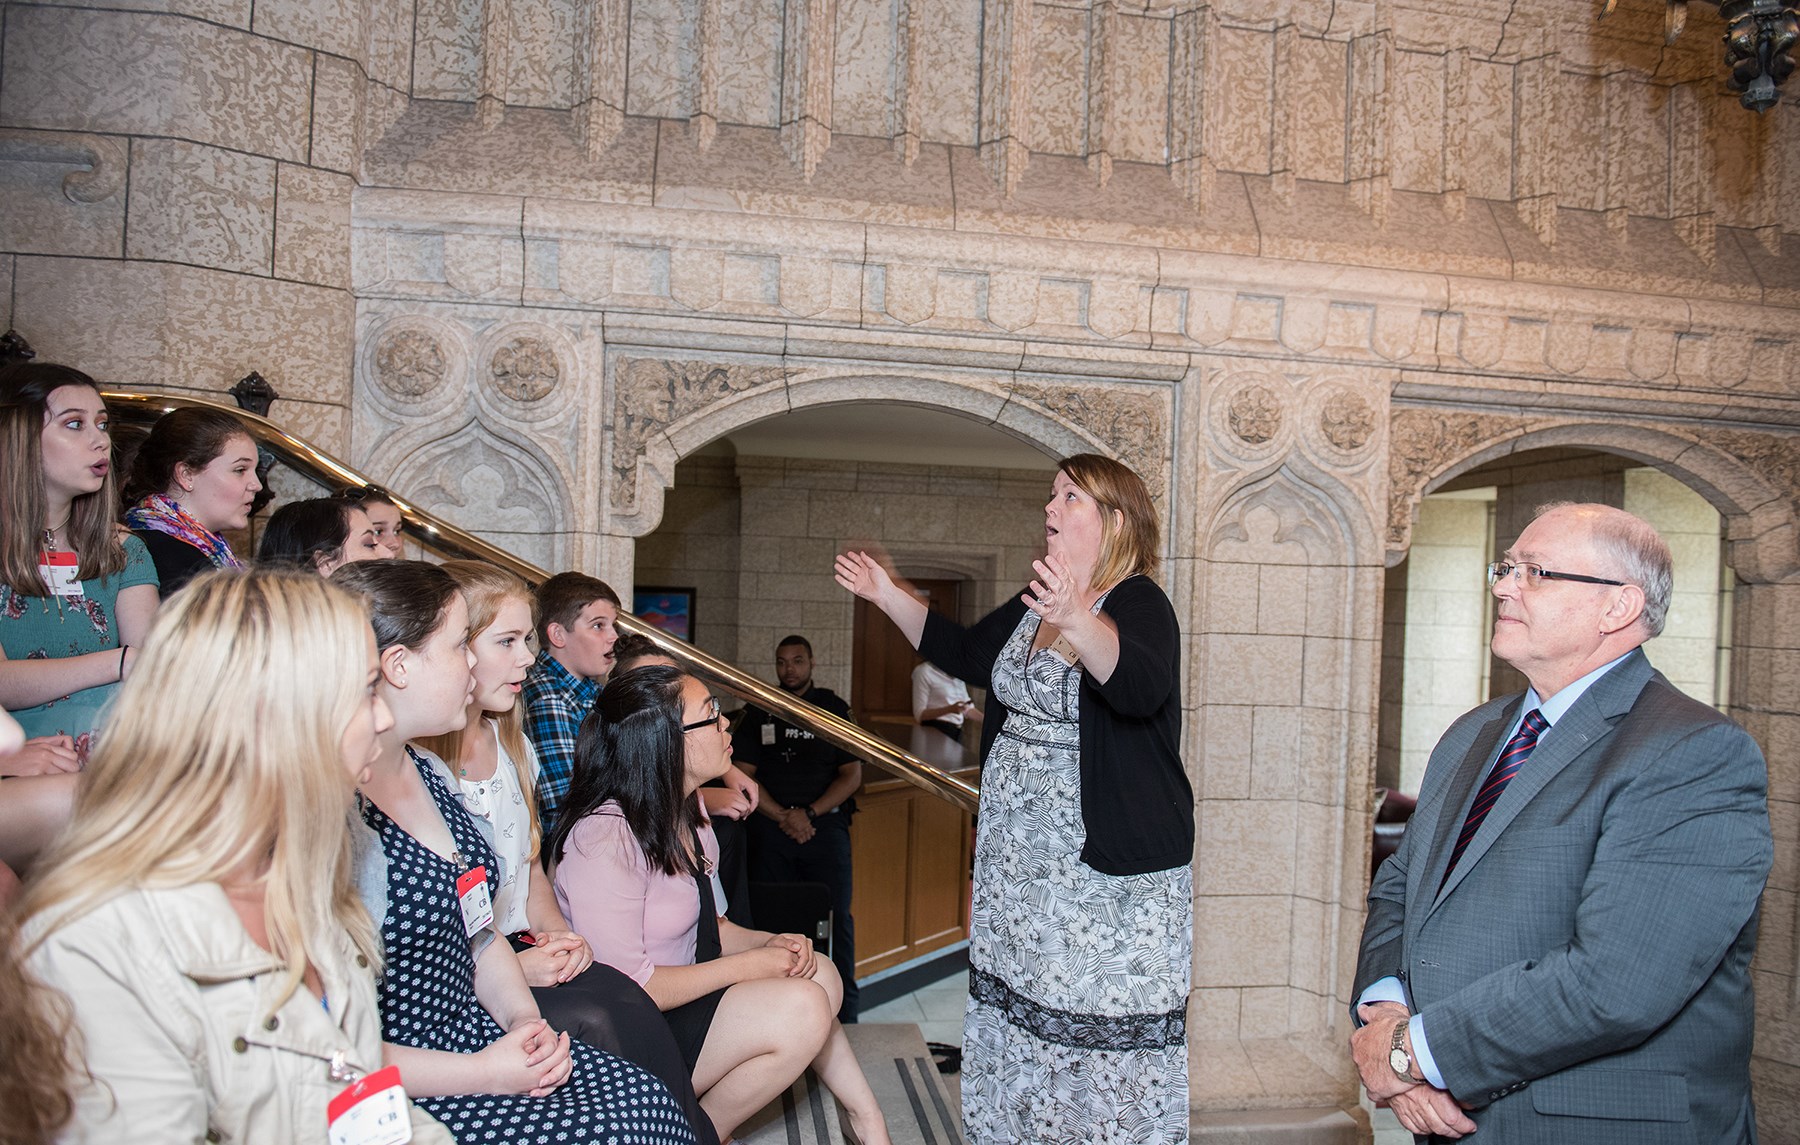 At the steps leading to the Senate, Kellie Walsh, Artistic Director of Shallaway, conducts a performance of the “Ode to Newfoundland” and a rendition of “O Canada” sung in Inuktitut.